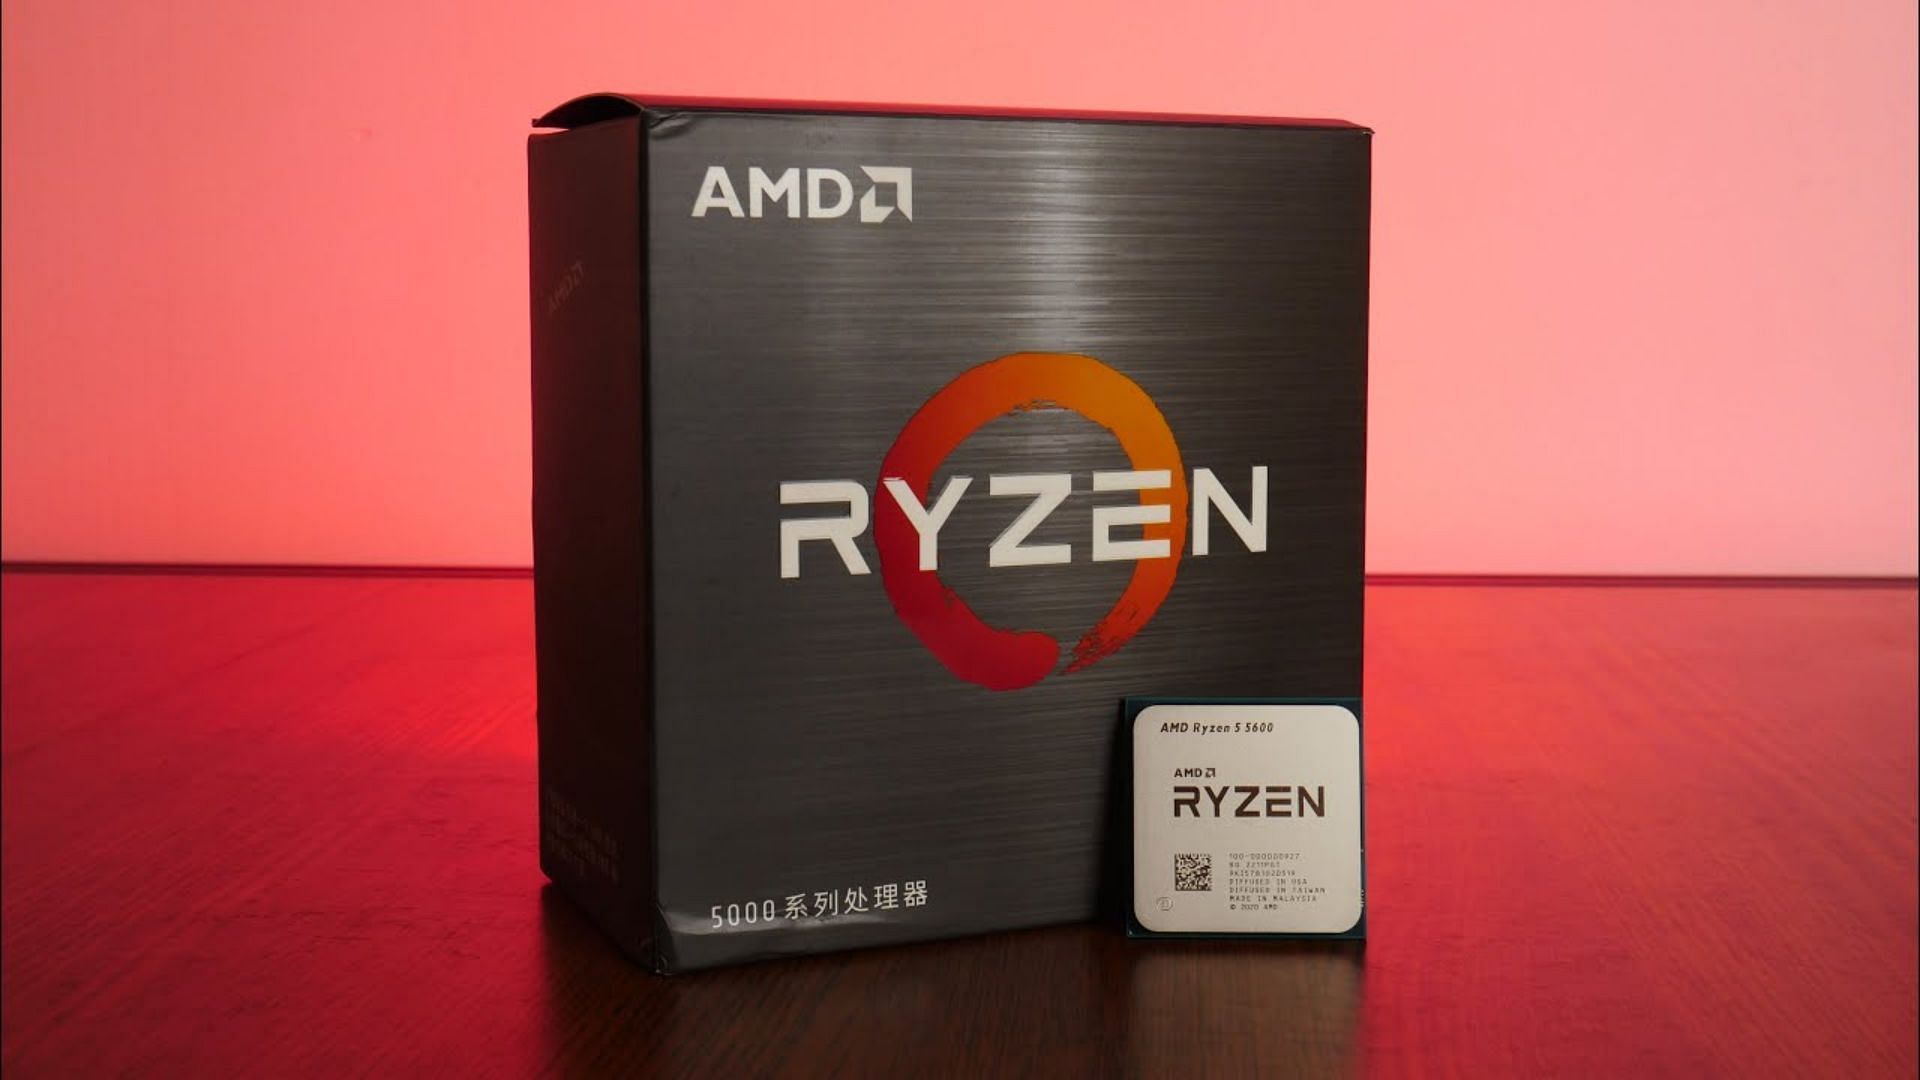 Arguably the most powerful chipset at this price (Image via Youtube/ALKtech)